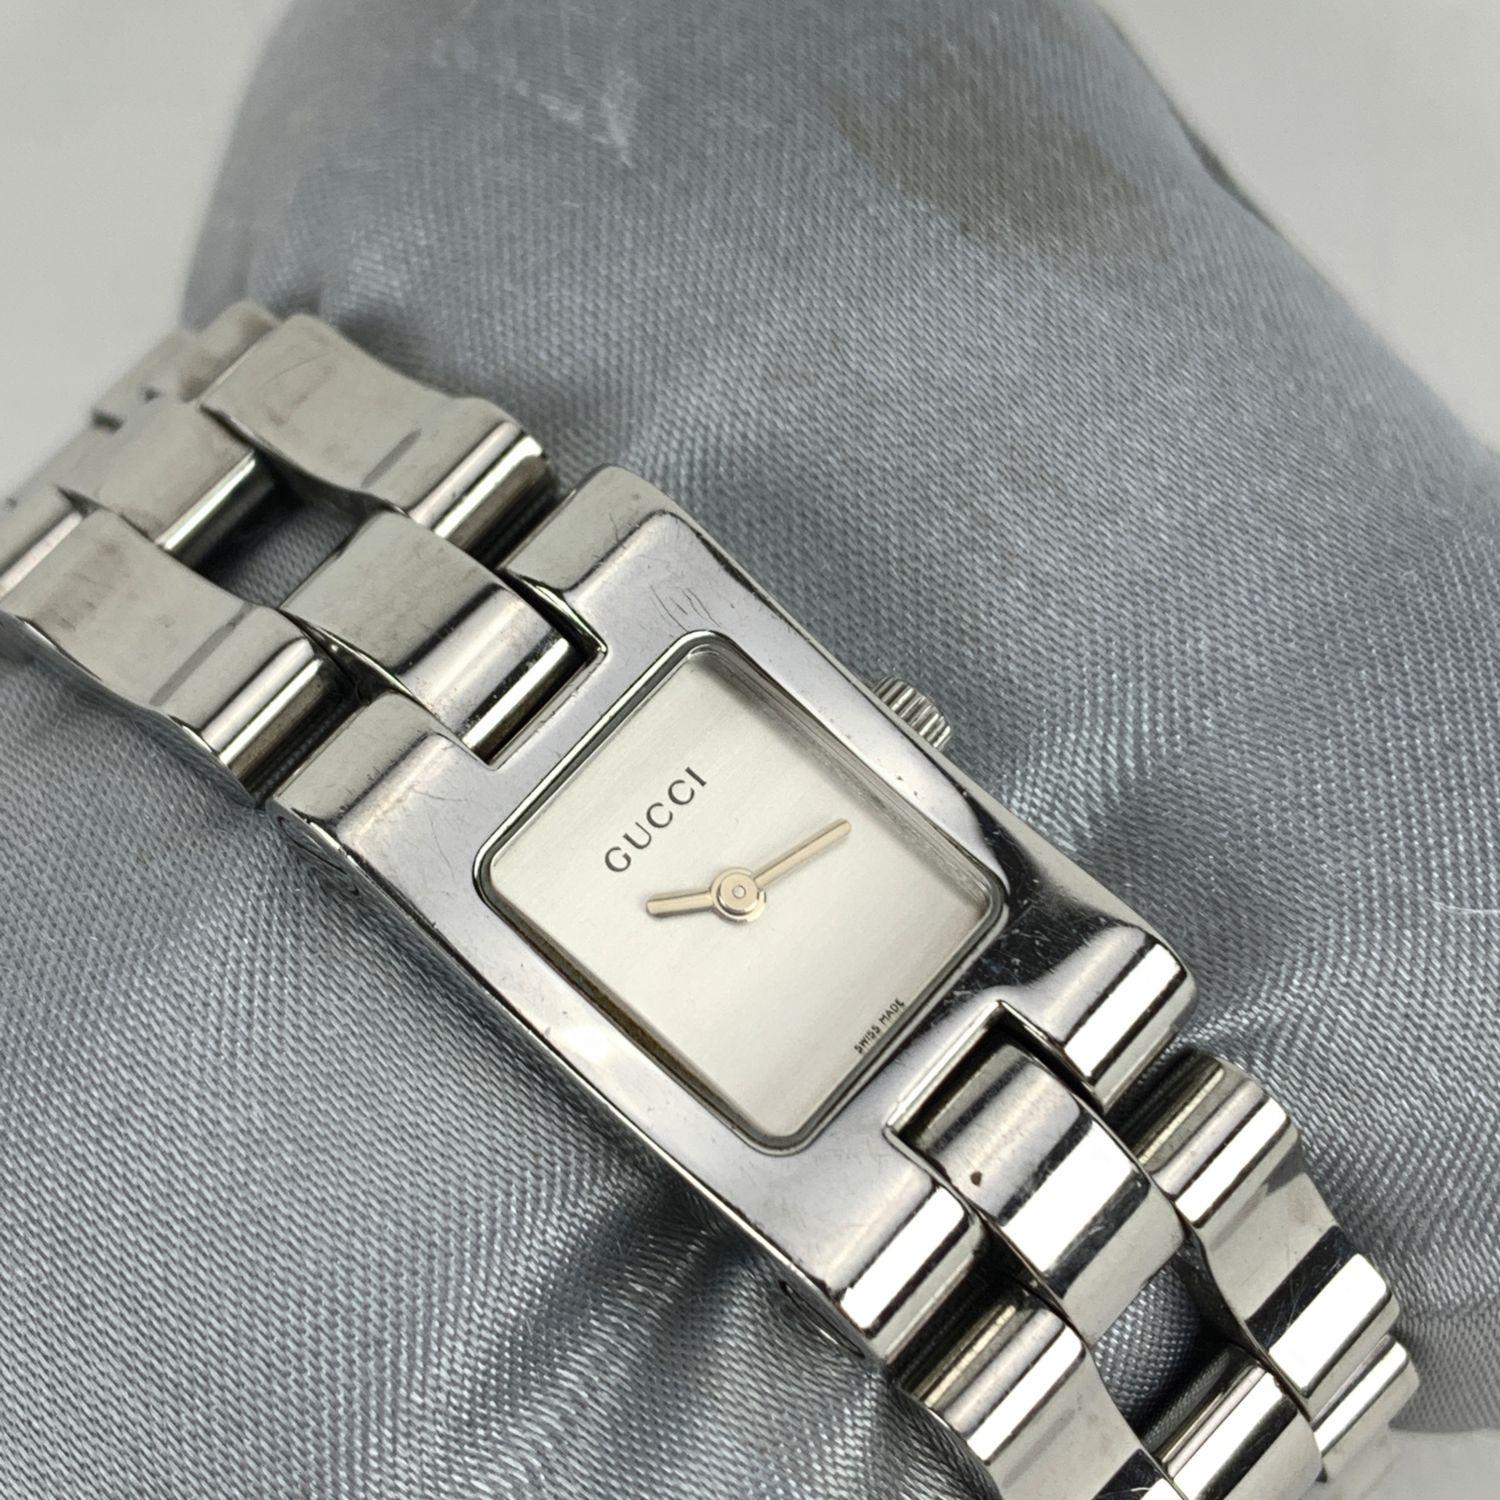 Gucci 2305 L stainless steel wrist watch. Stainless steel case (Approximately 28 mm x 17 mm). White Dial and Sapphire crystal. Swiss Made Quartz movement. Gucci written on face, clasp & reverse.Water Resistant to 3atm. Deployant Clasp. Swiss Made.